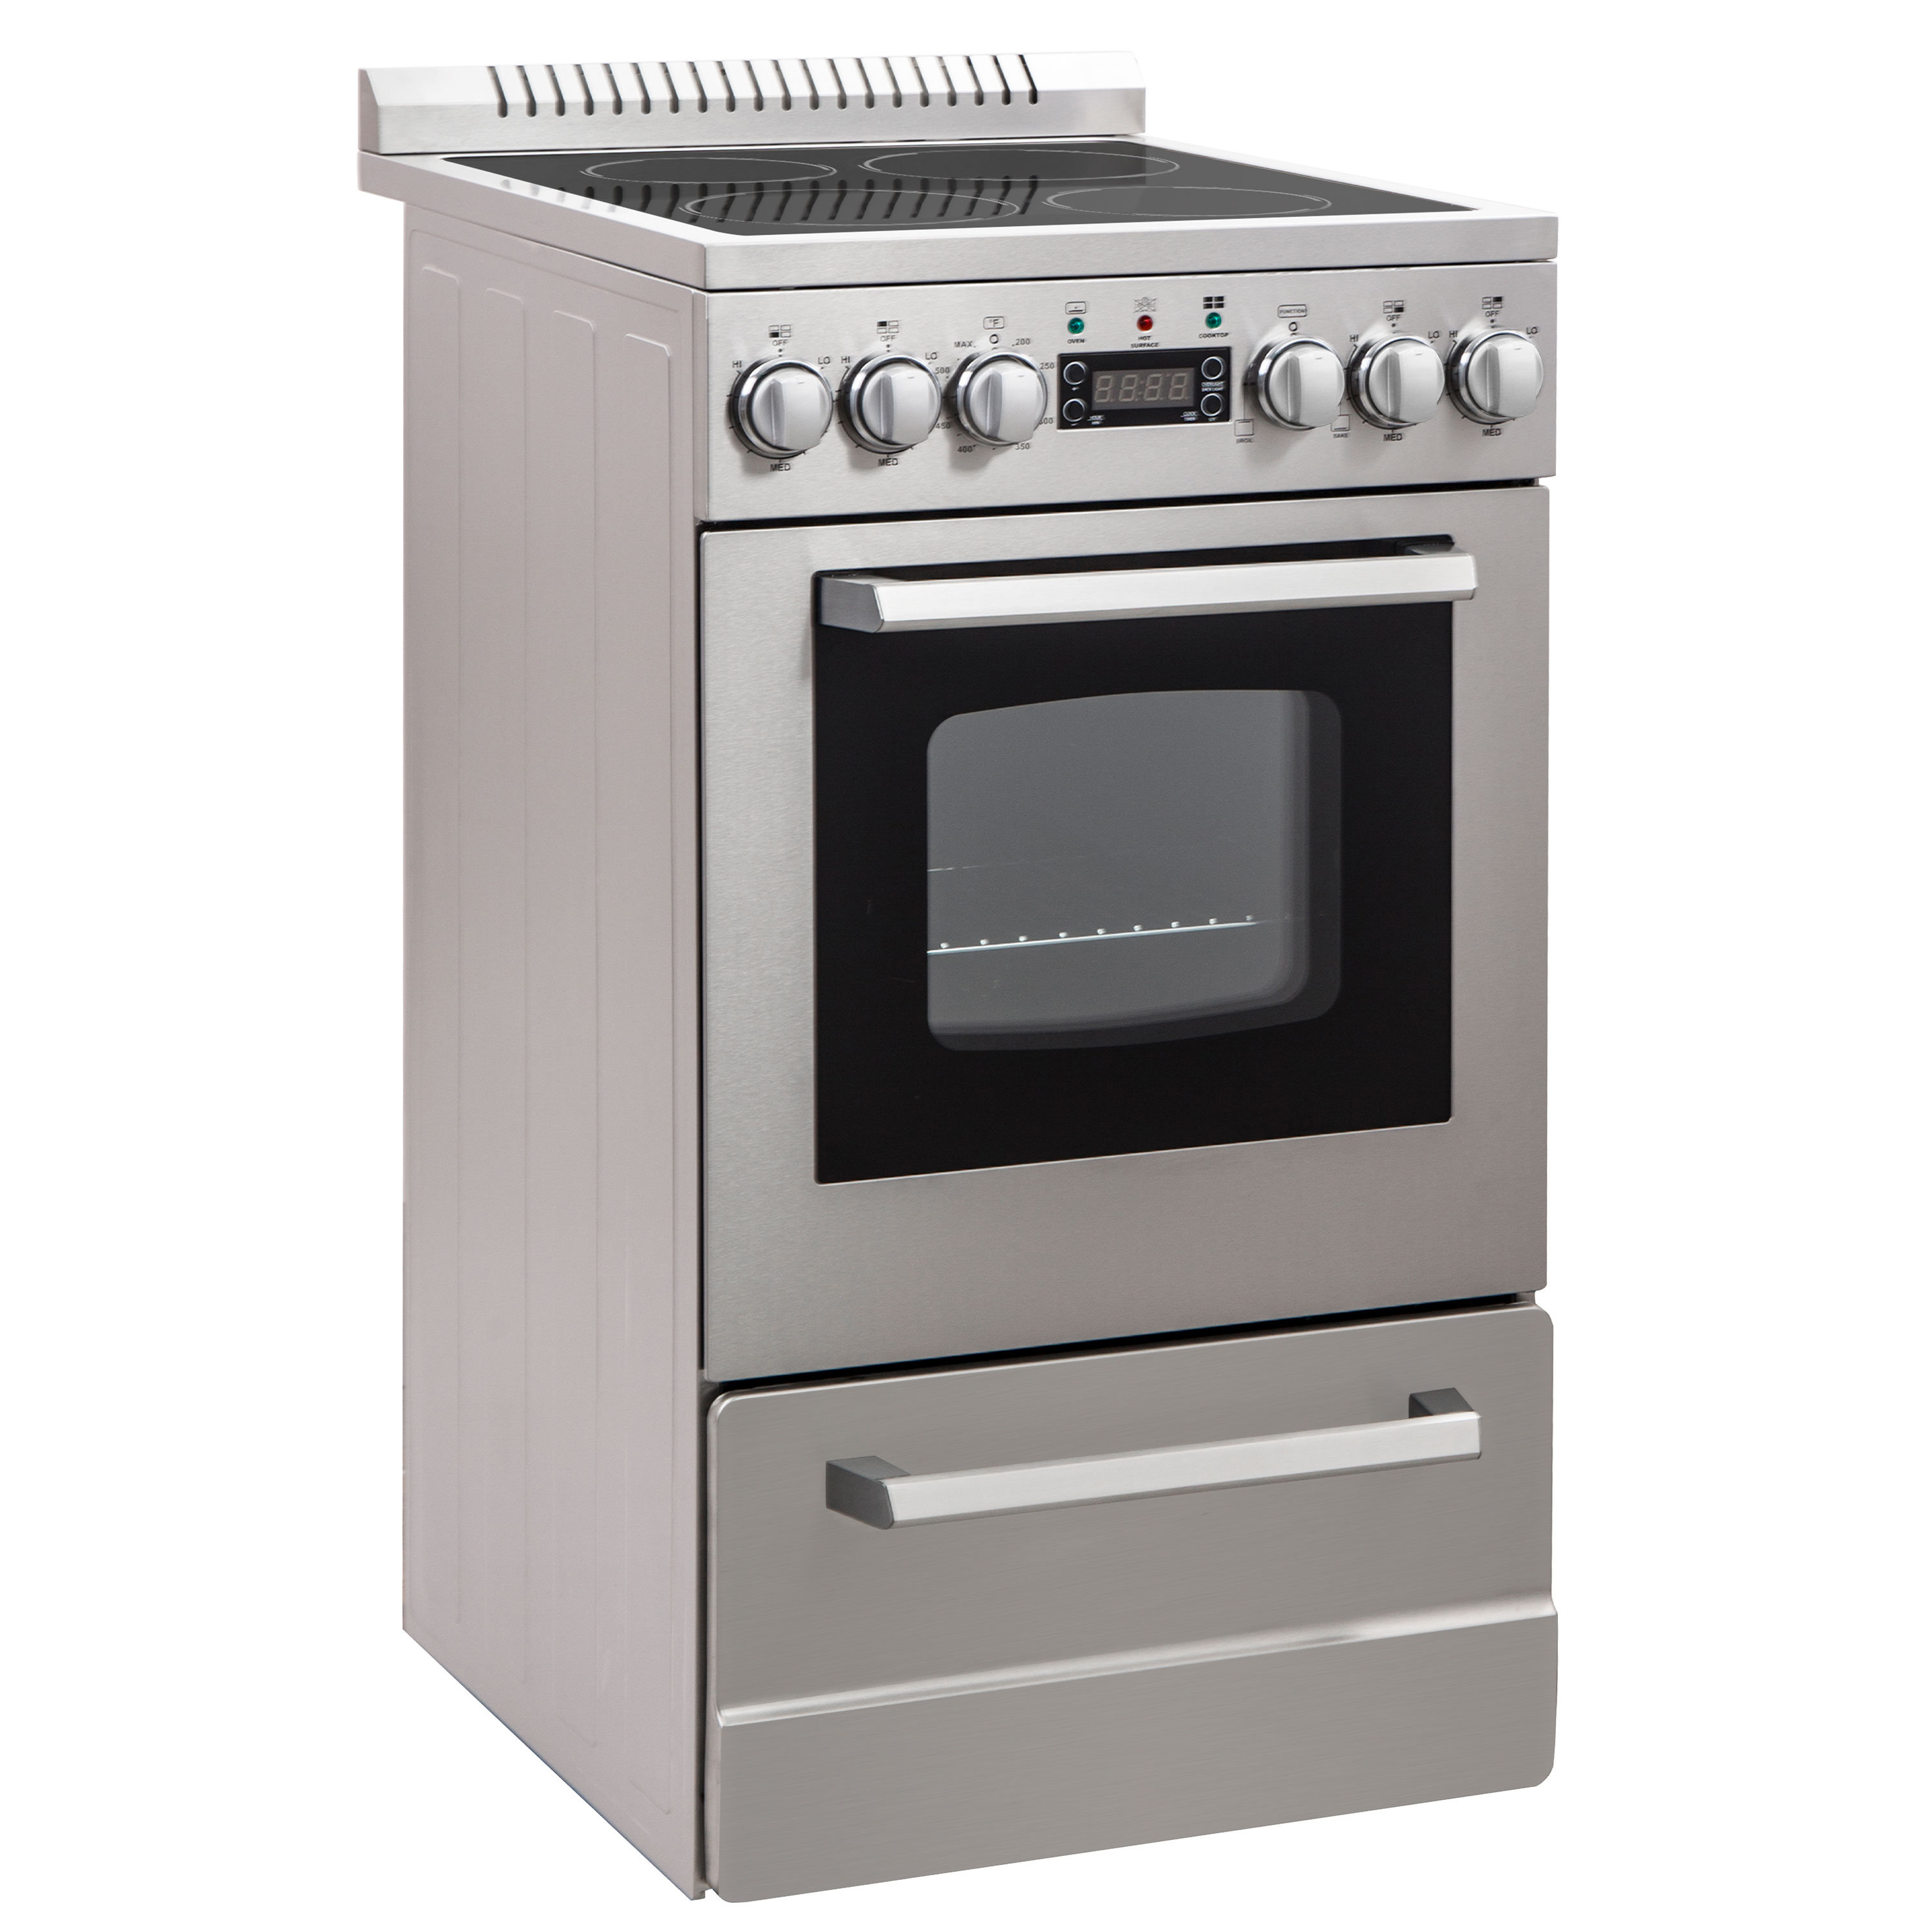 Premium Levella 20-in 4 Burners 2.1-cu ft Freestanding Electric Range (Stainless) | PRE2023GS